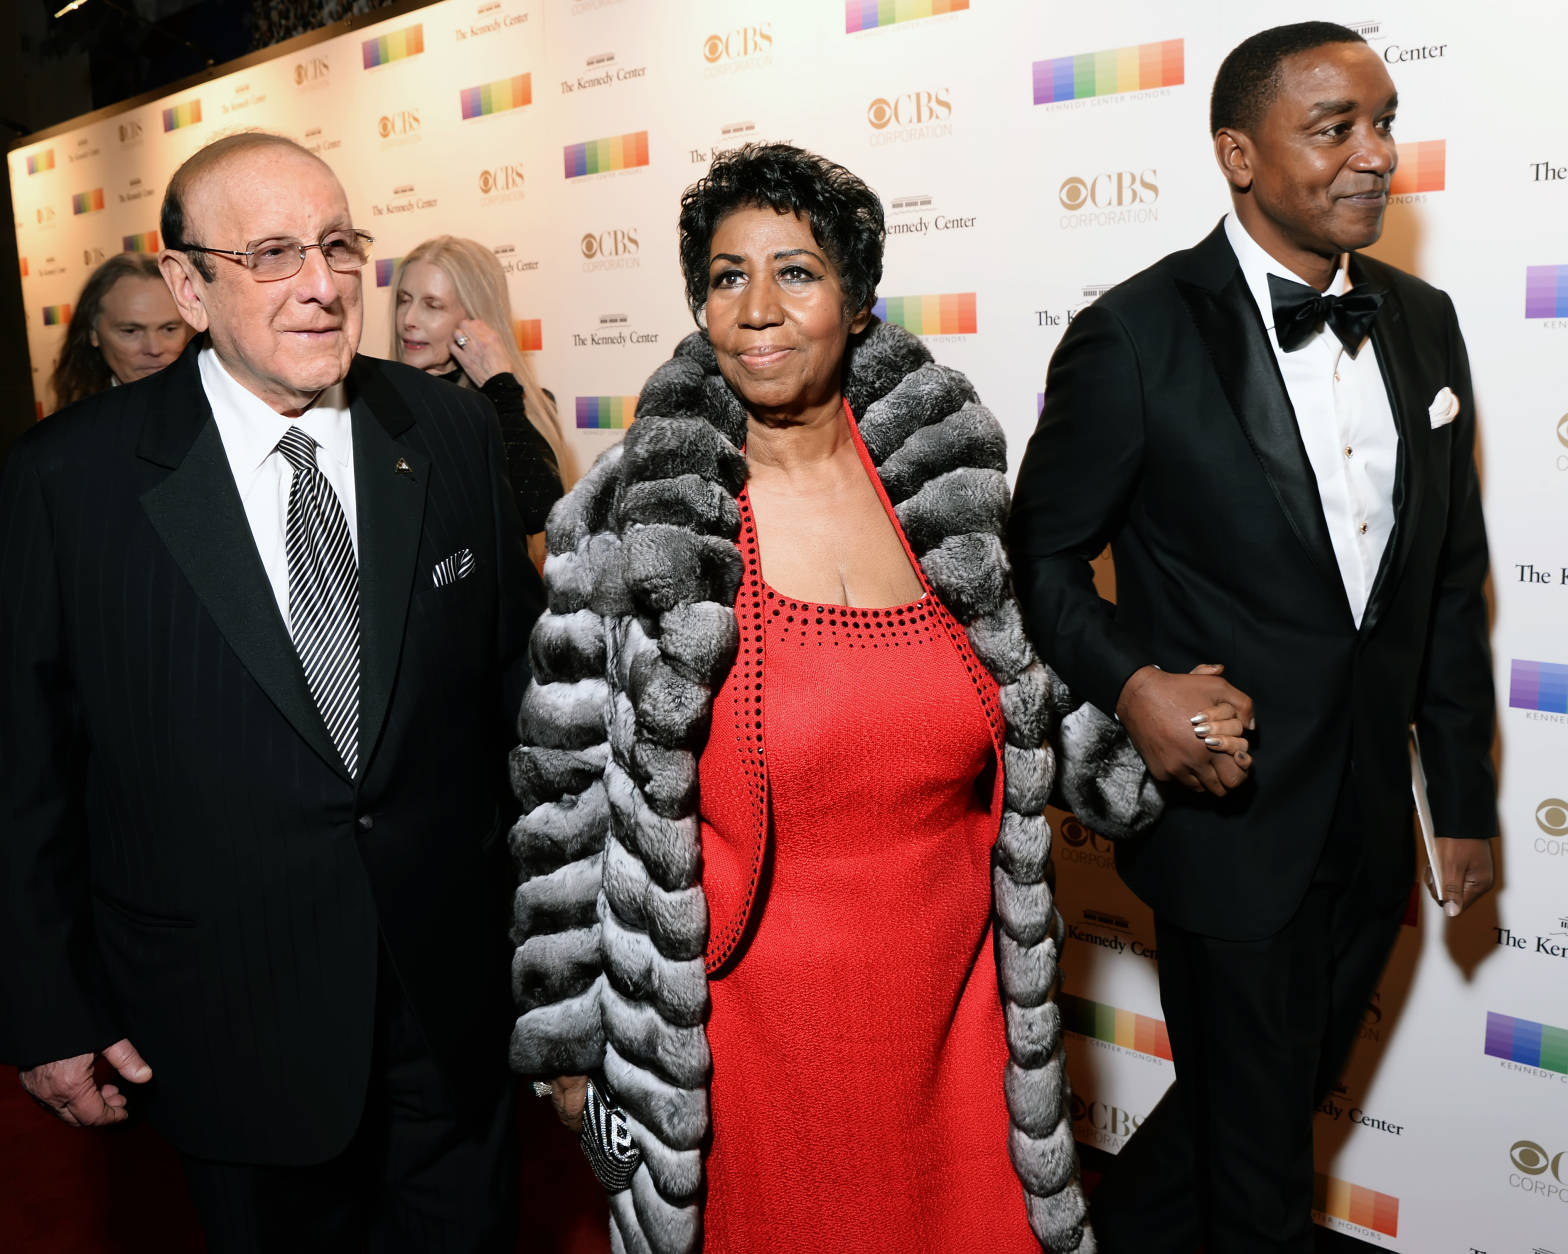 Clive Davis arrives with former Kennedy Center Honoree Aretha Franklin.  (Courtesy Shannon Finney, <a href="http://www.shannonfinneyphotography.com">www.shannonfinneyphotography.com</a>)